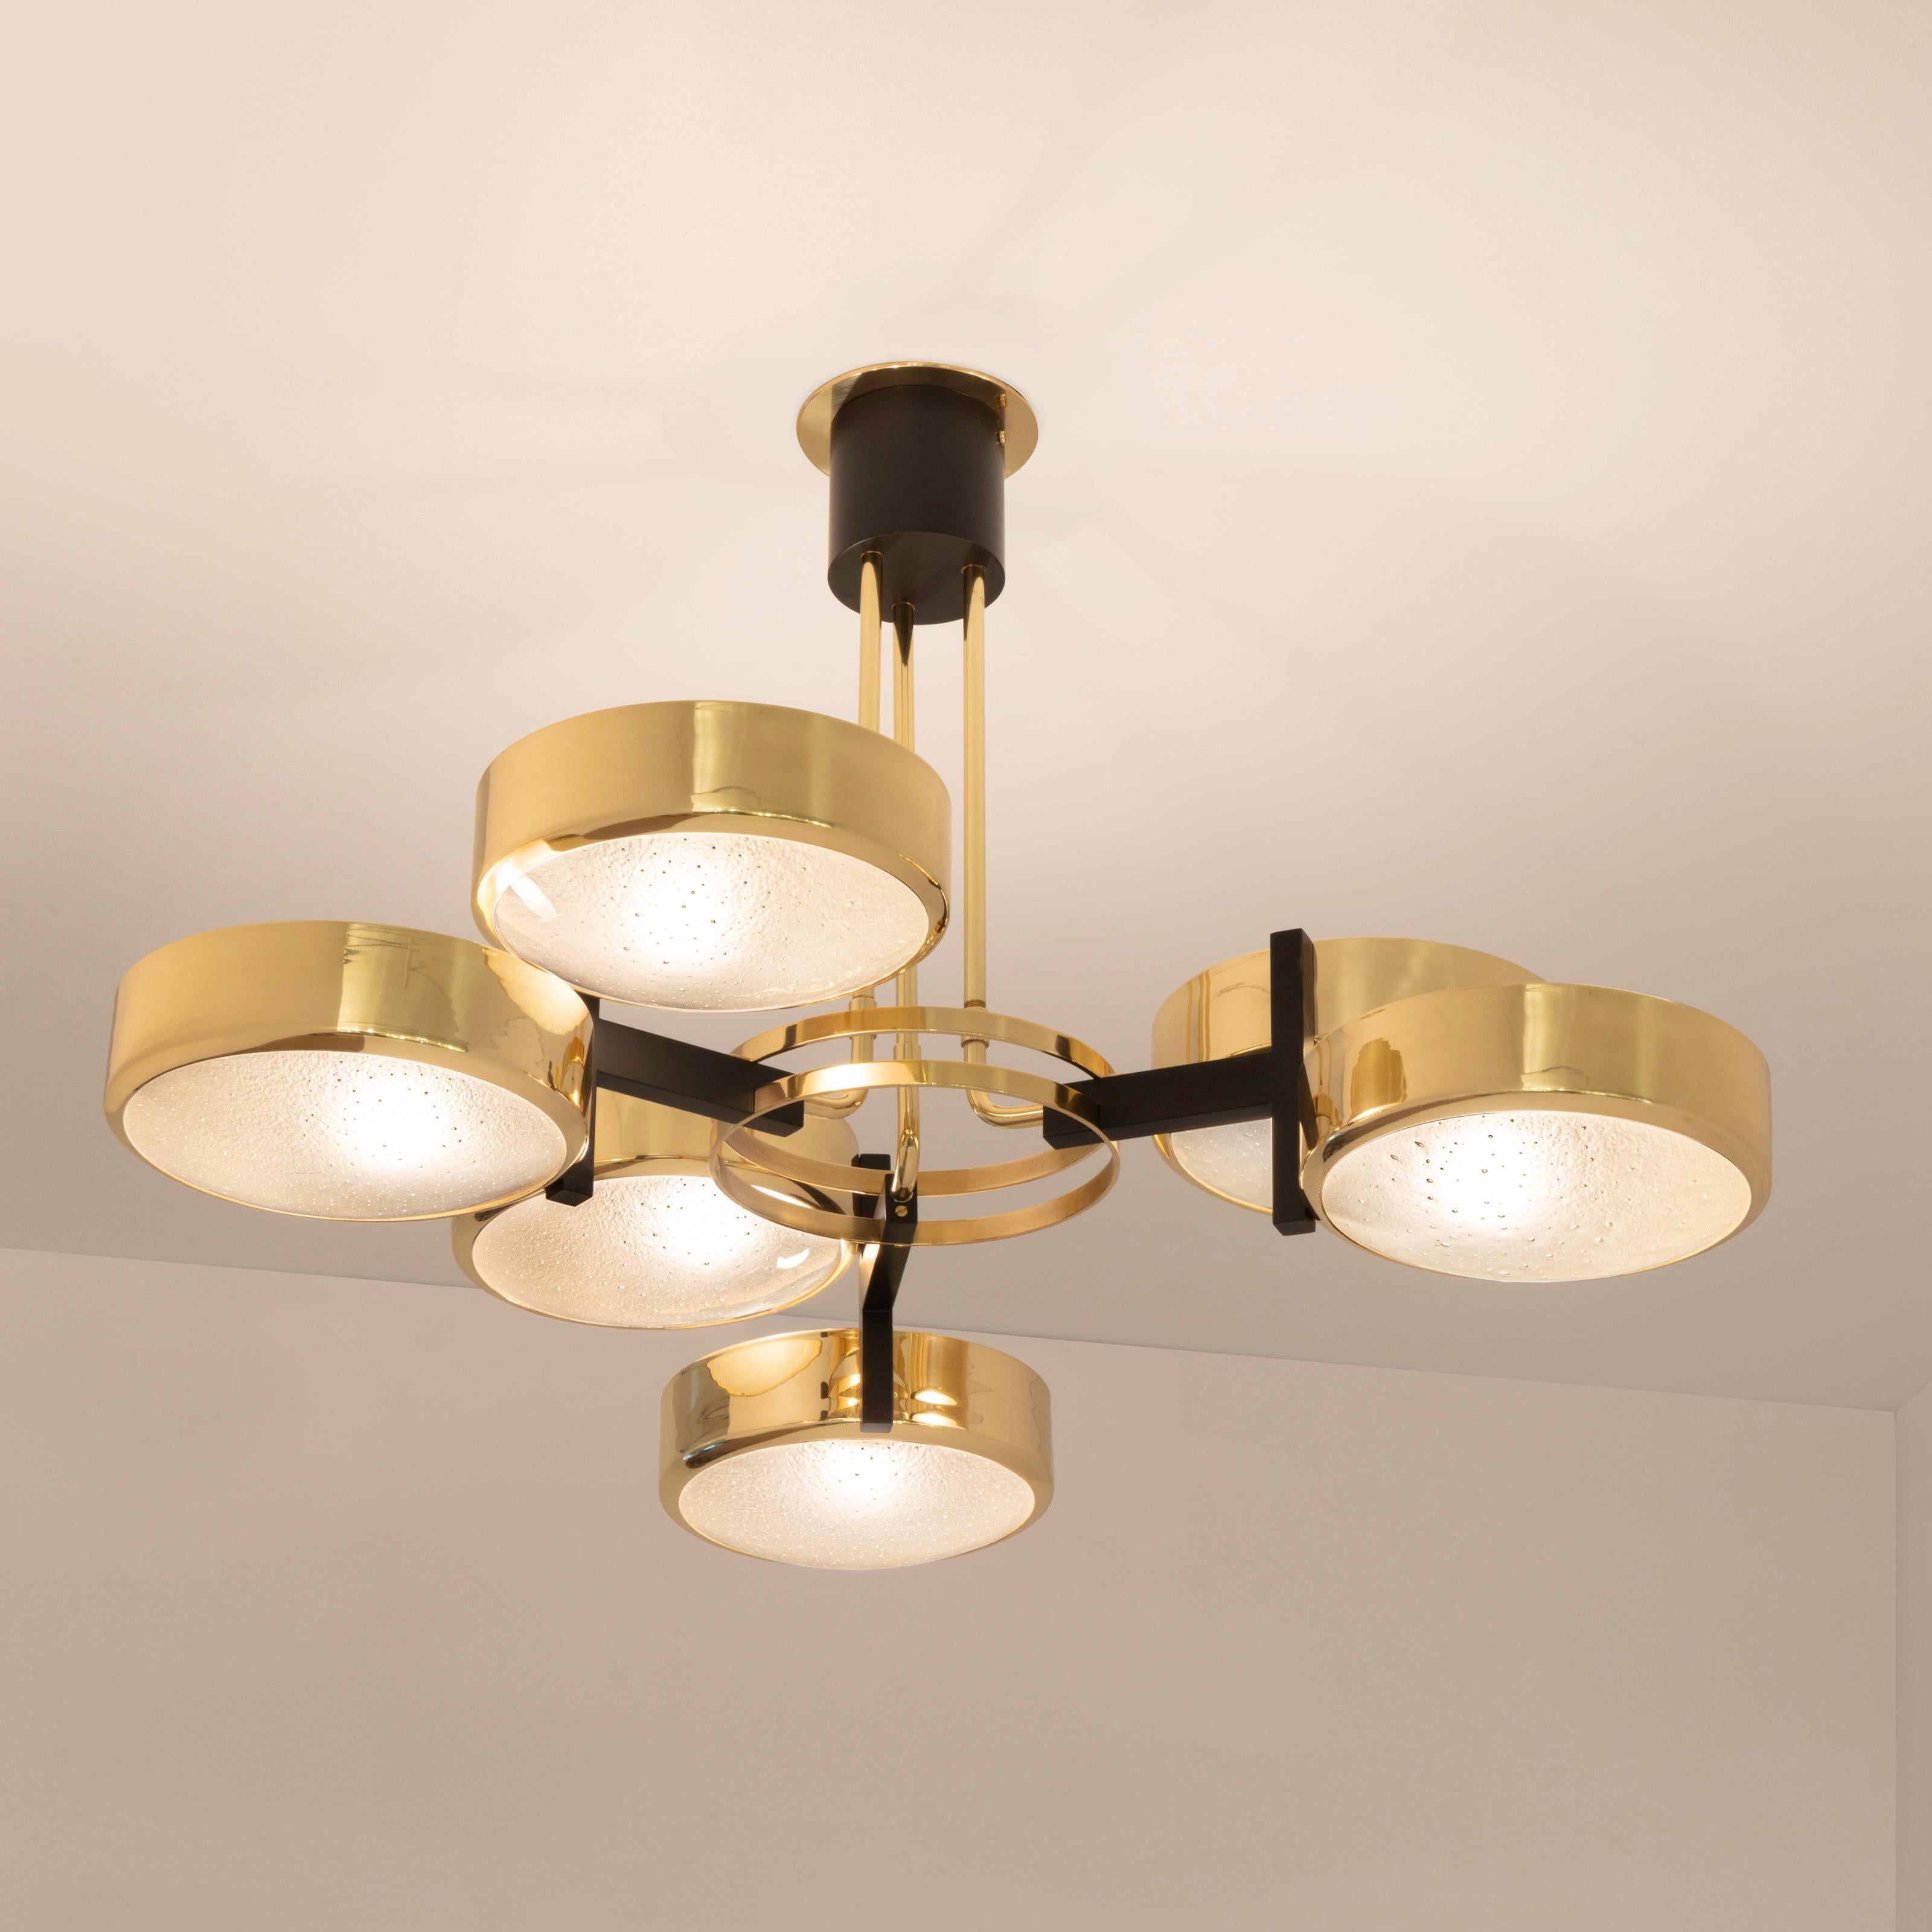 Eclissi Ceiling Light by Gaspare Asaro - Bronze Finish Murano Glass Version In New Condition For Sale In New York, NY